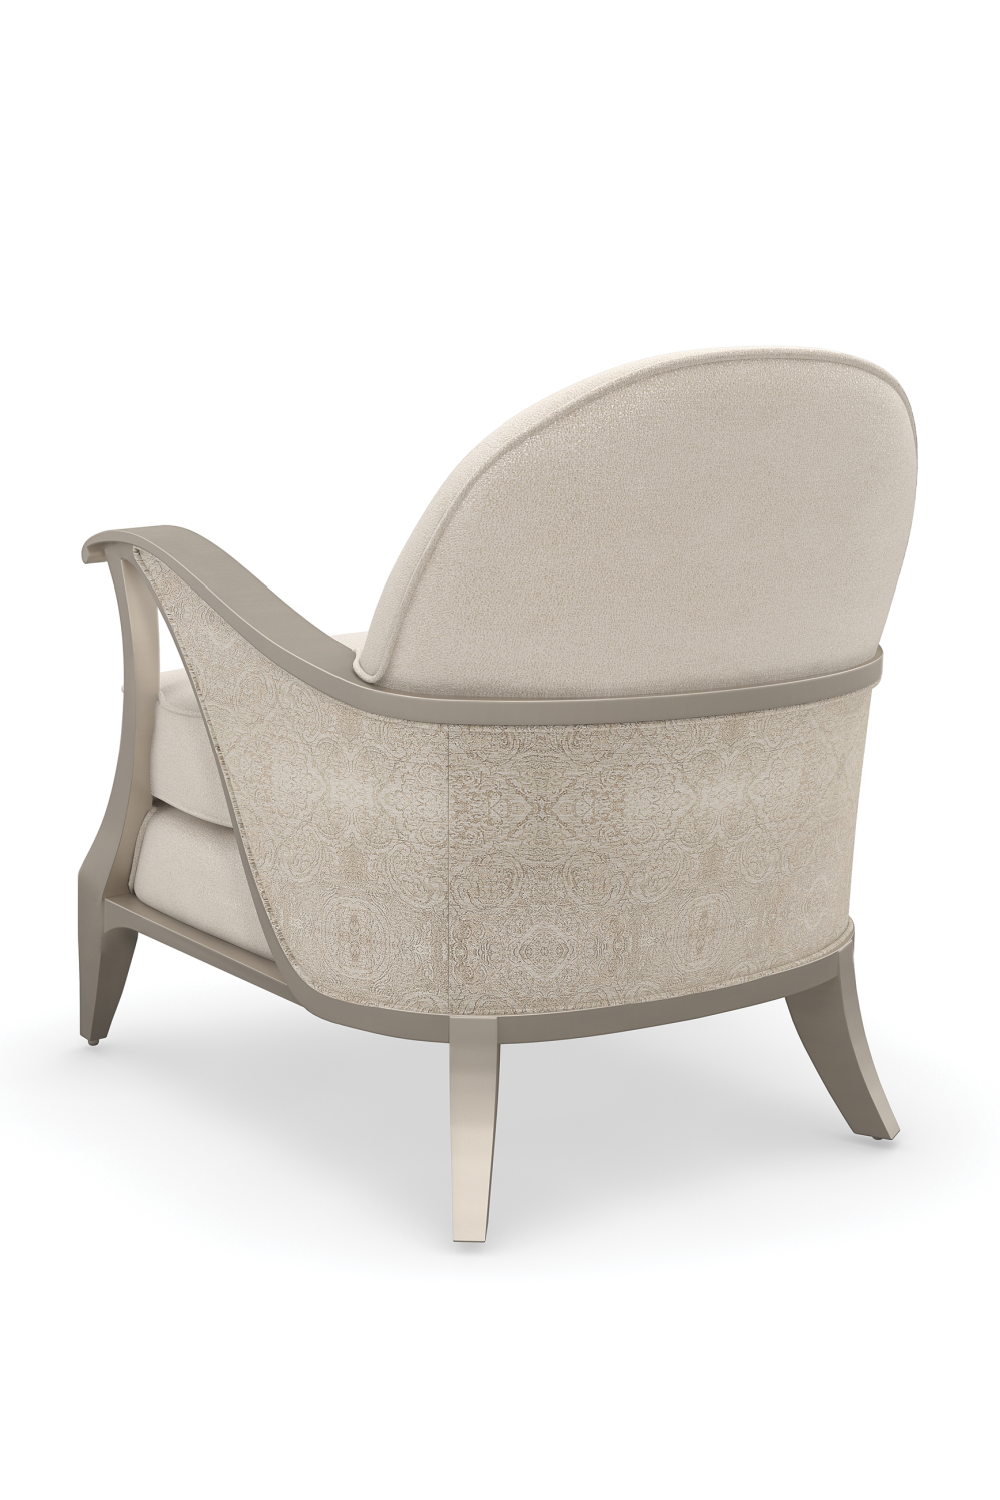 Beige Contemporary Lounge Chair | Caracole Curtsy | Oroa.com